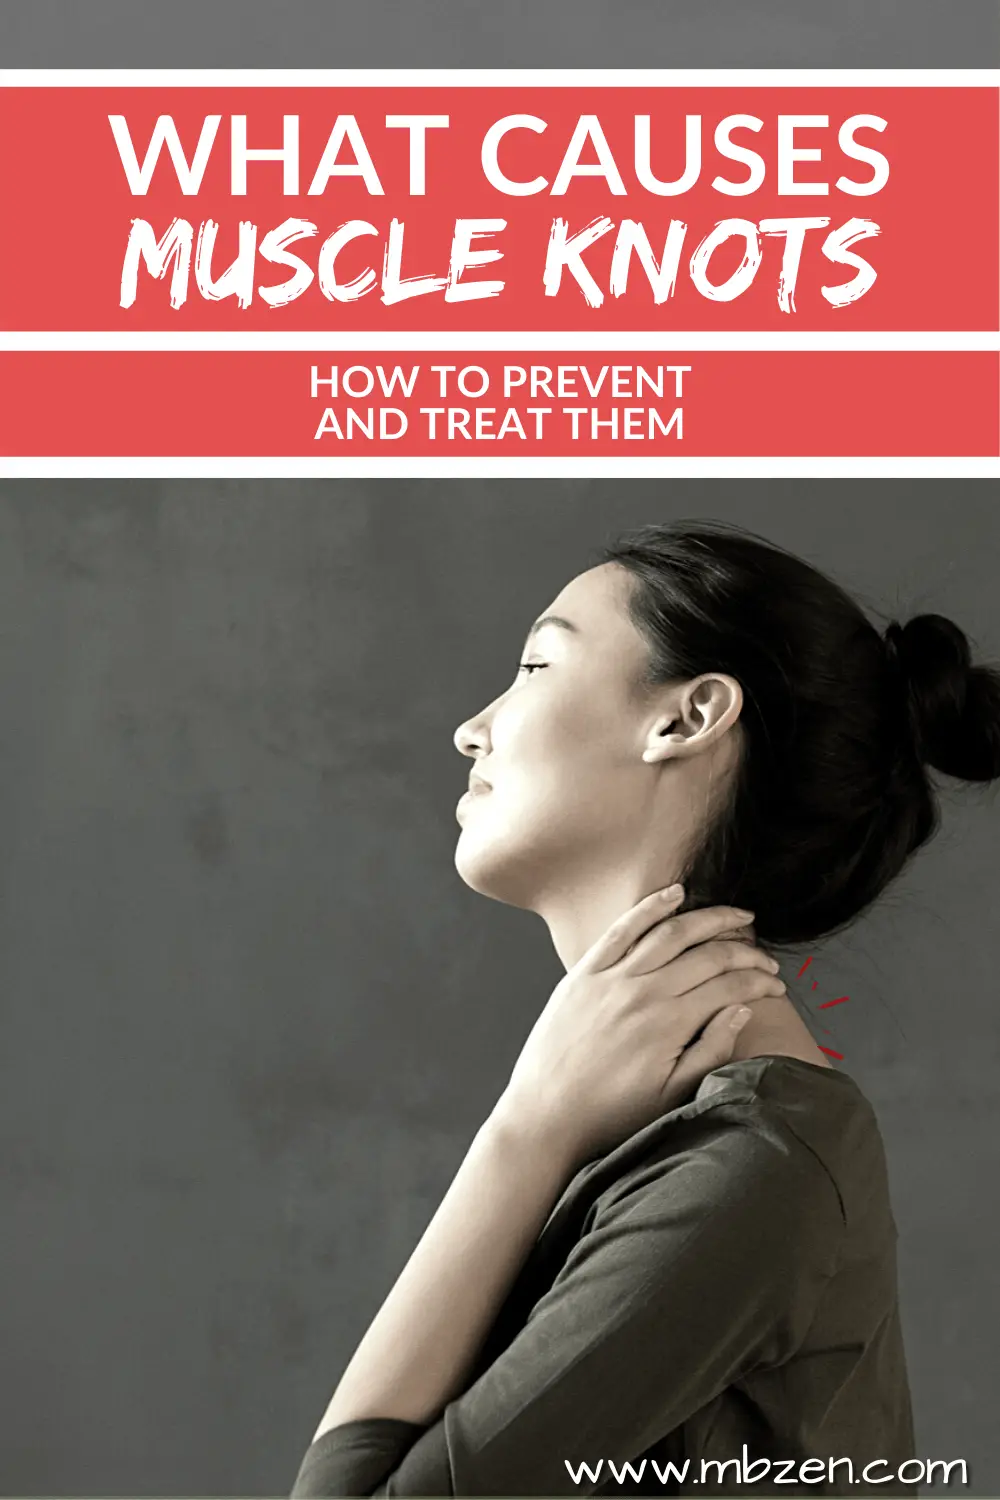 how to prevent muscle knots